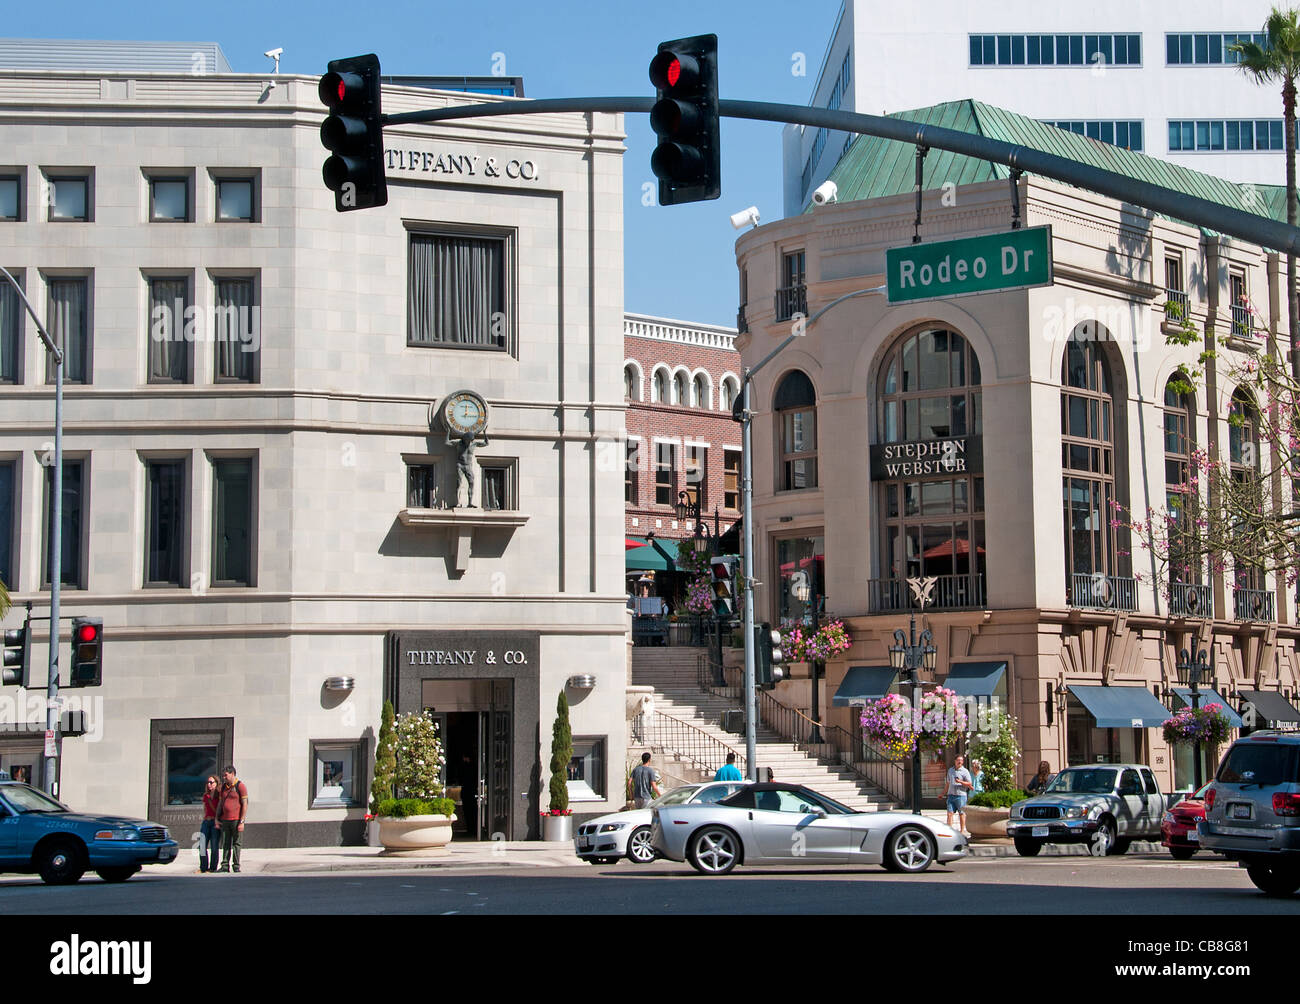 Tiffany & Co magasins boutiques de Rodeo Drive Beverly Hills Los Angeles California United States Banque D'Images